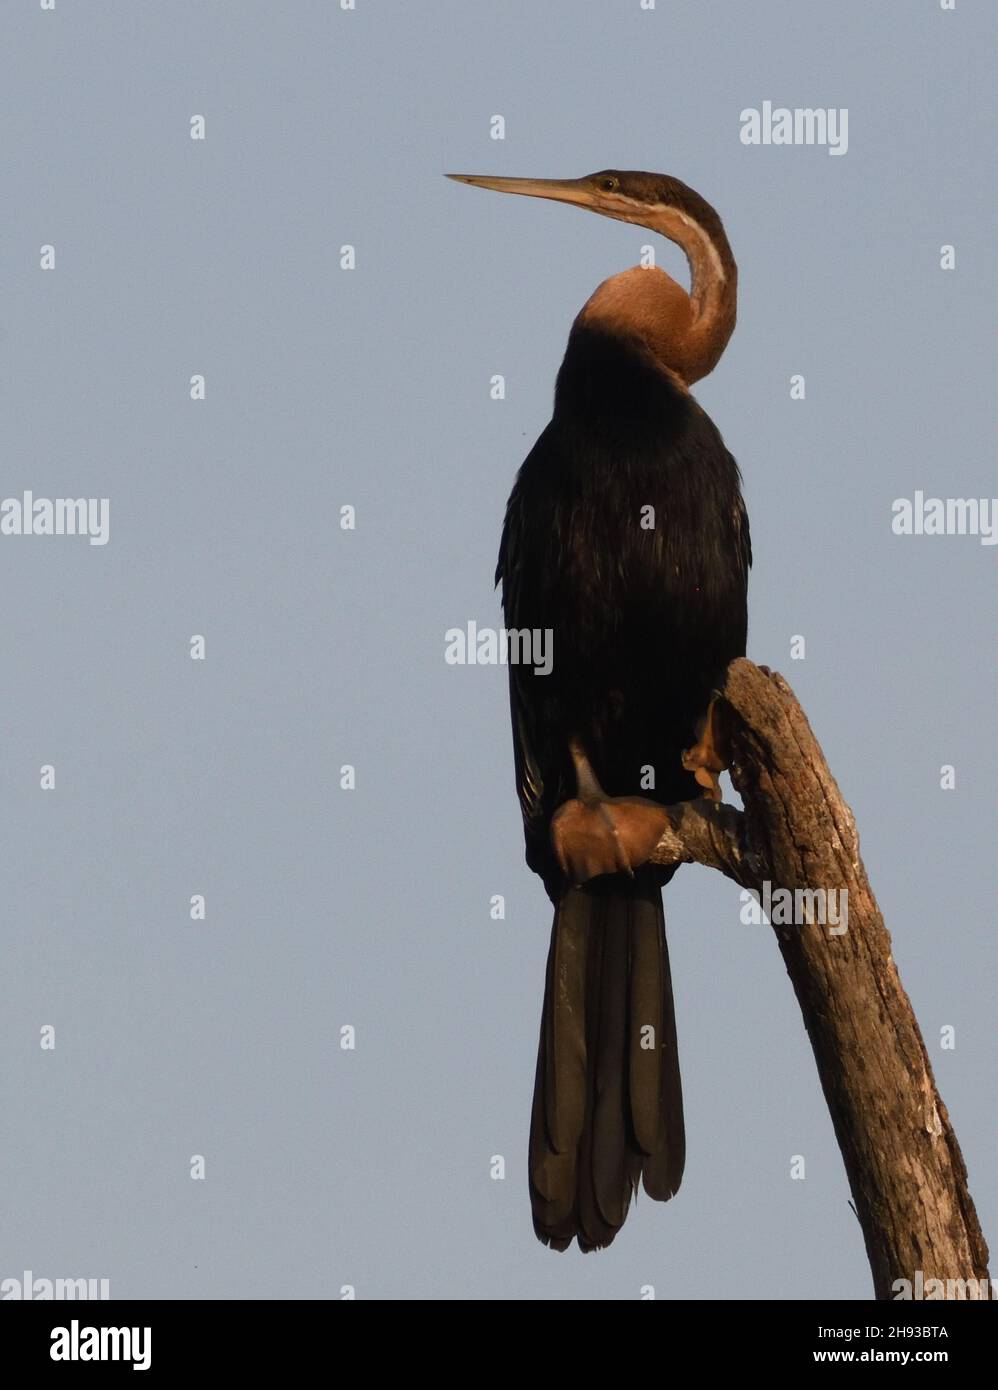 An African darter (Anhinga rufa) or  snakebird perches on a branch above a creek off the Gambia River. Tendaba, The Republic of the Gambia. Stock Photo